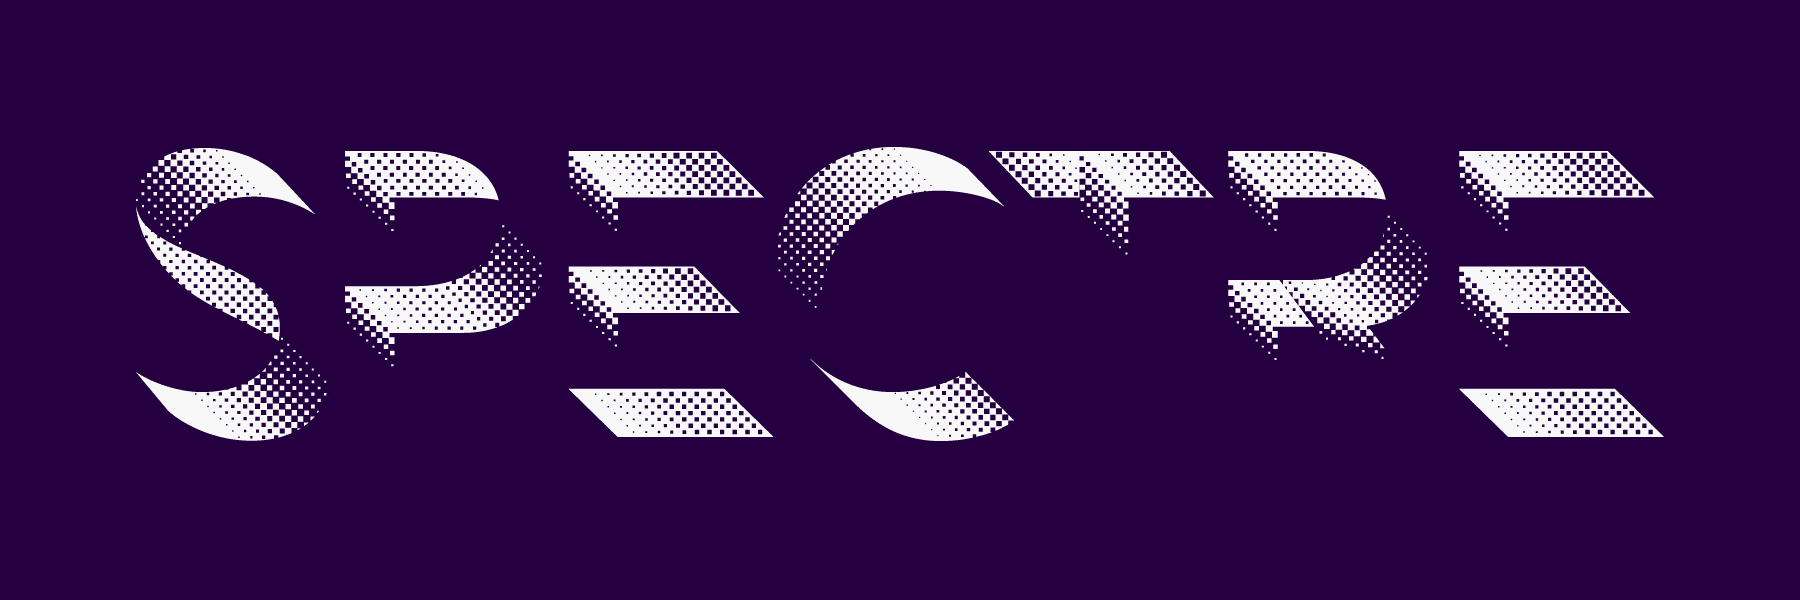 The Spectre logo, off-white on a deep purple background. The letterforms appear as if three dimensional, viewed from slightly below and to the right, and are rendered in a halftone-dot pattern to suggest shading, with some letters fading off into the background.